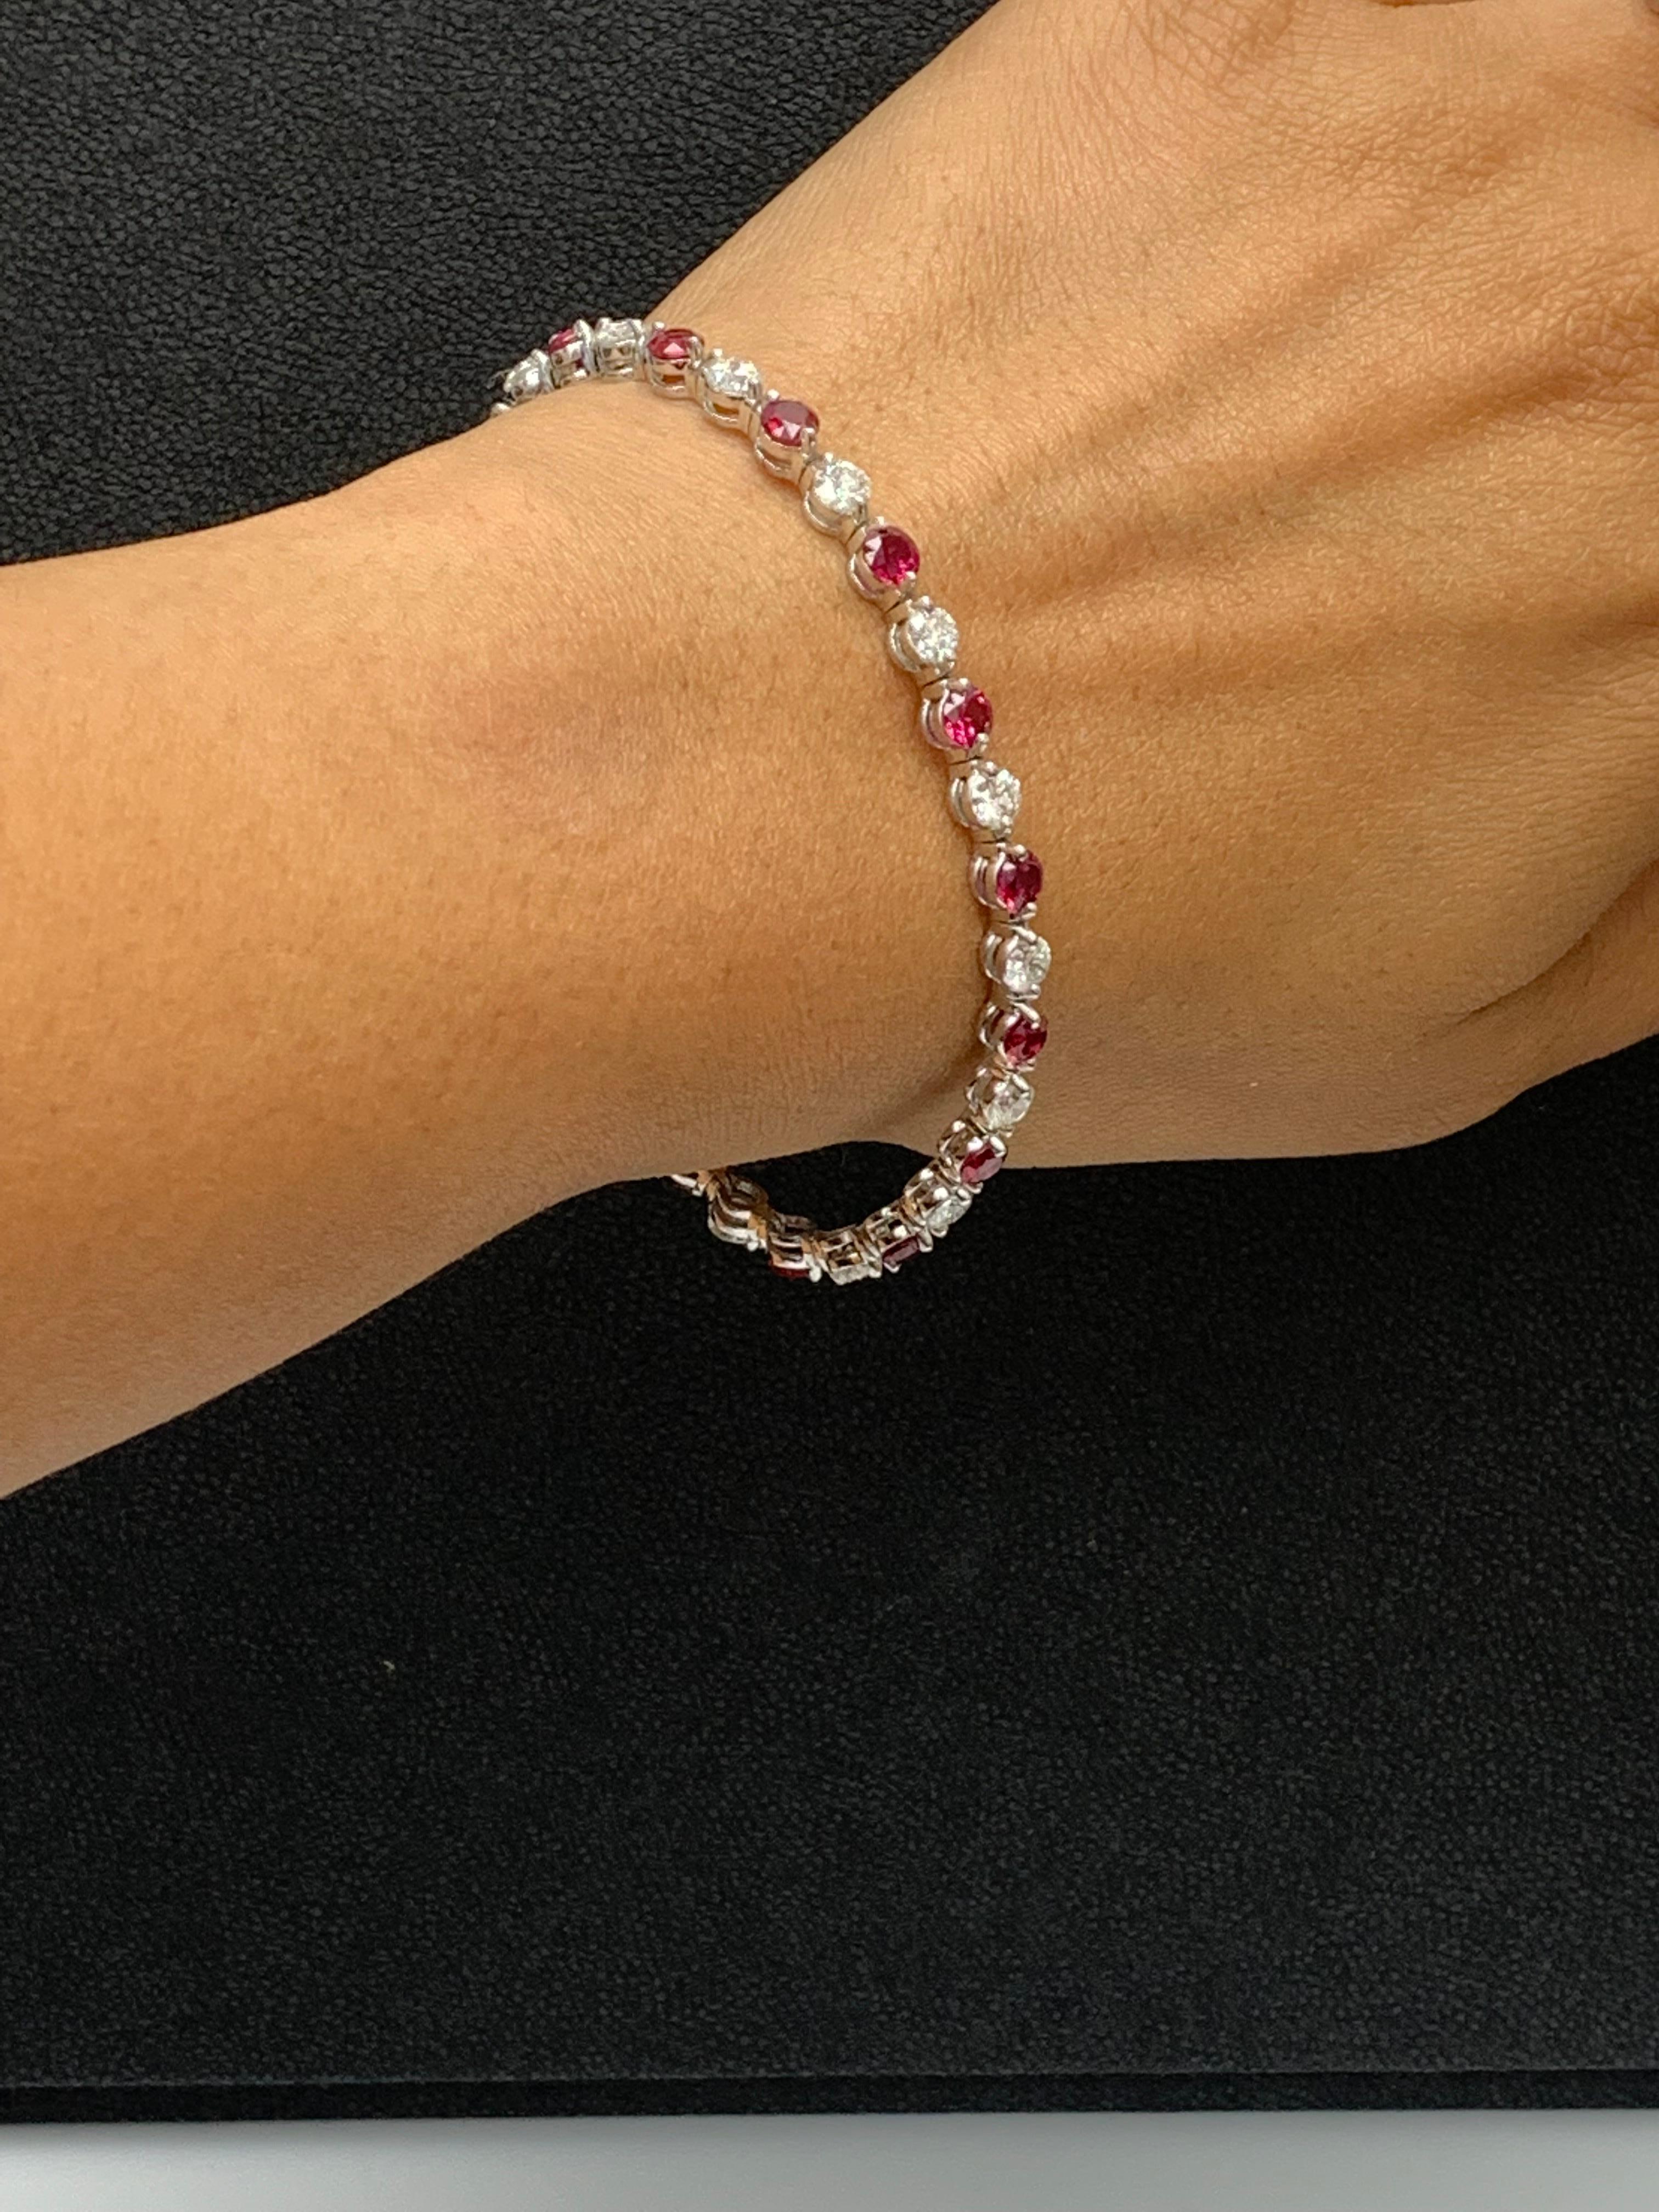 Modern 4.55 Carat Round Ruby and Diamond Bracelet in 14k White Gold For Sale